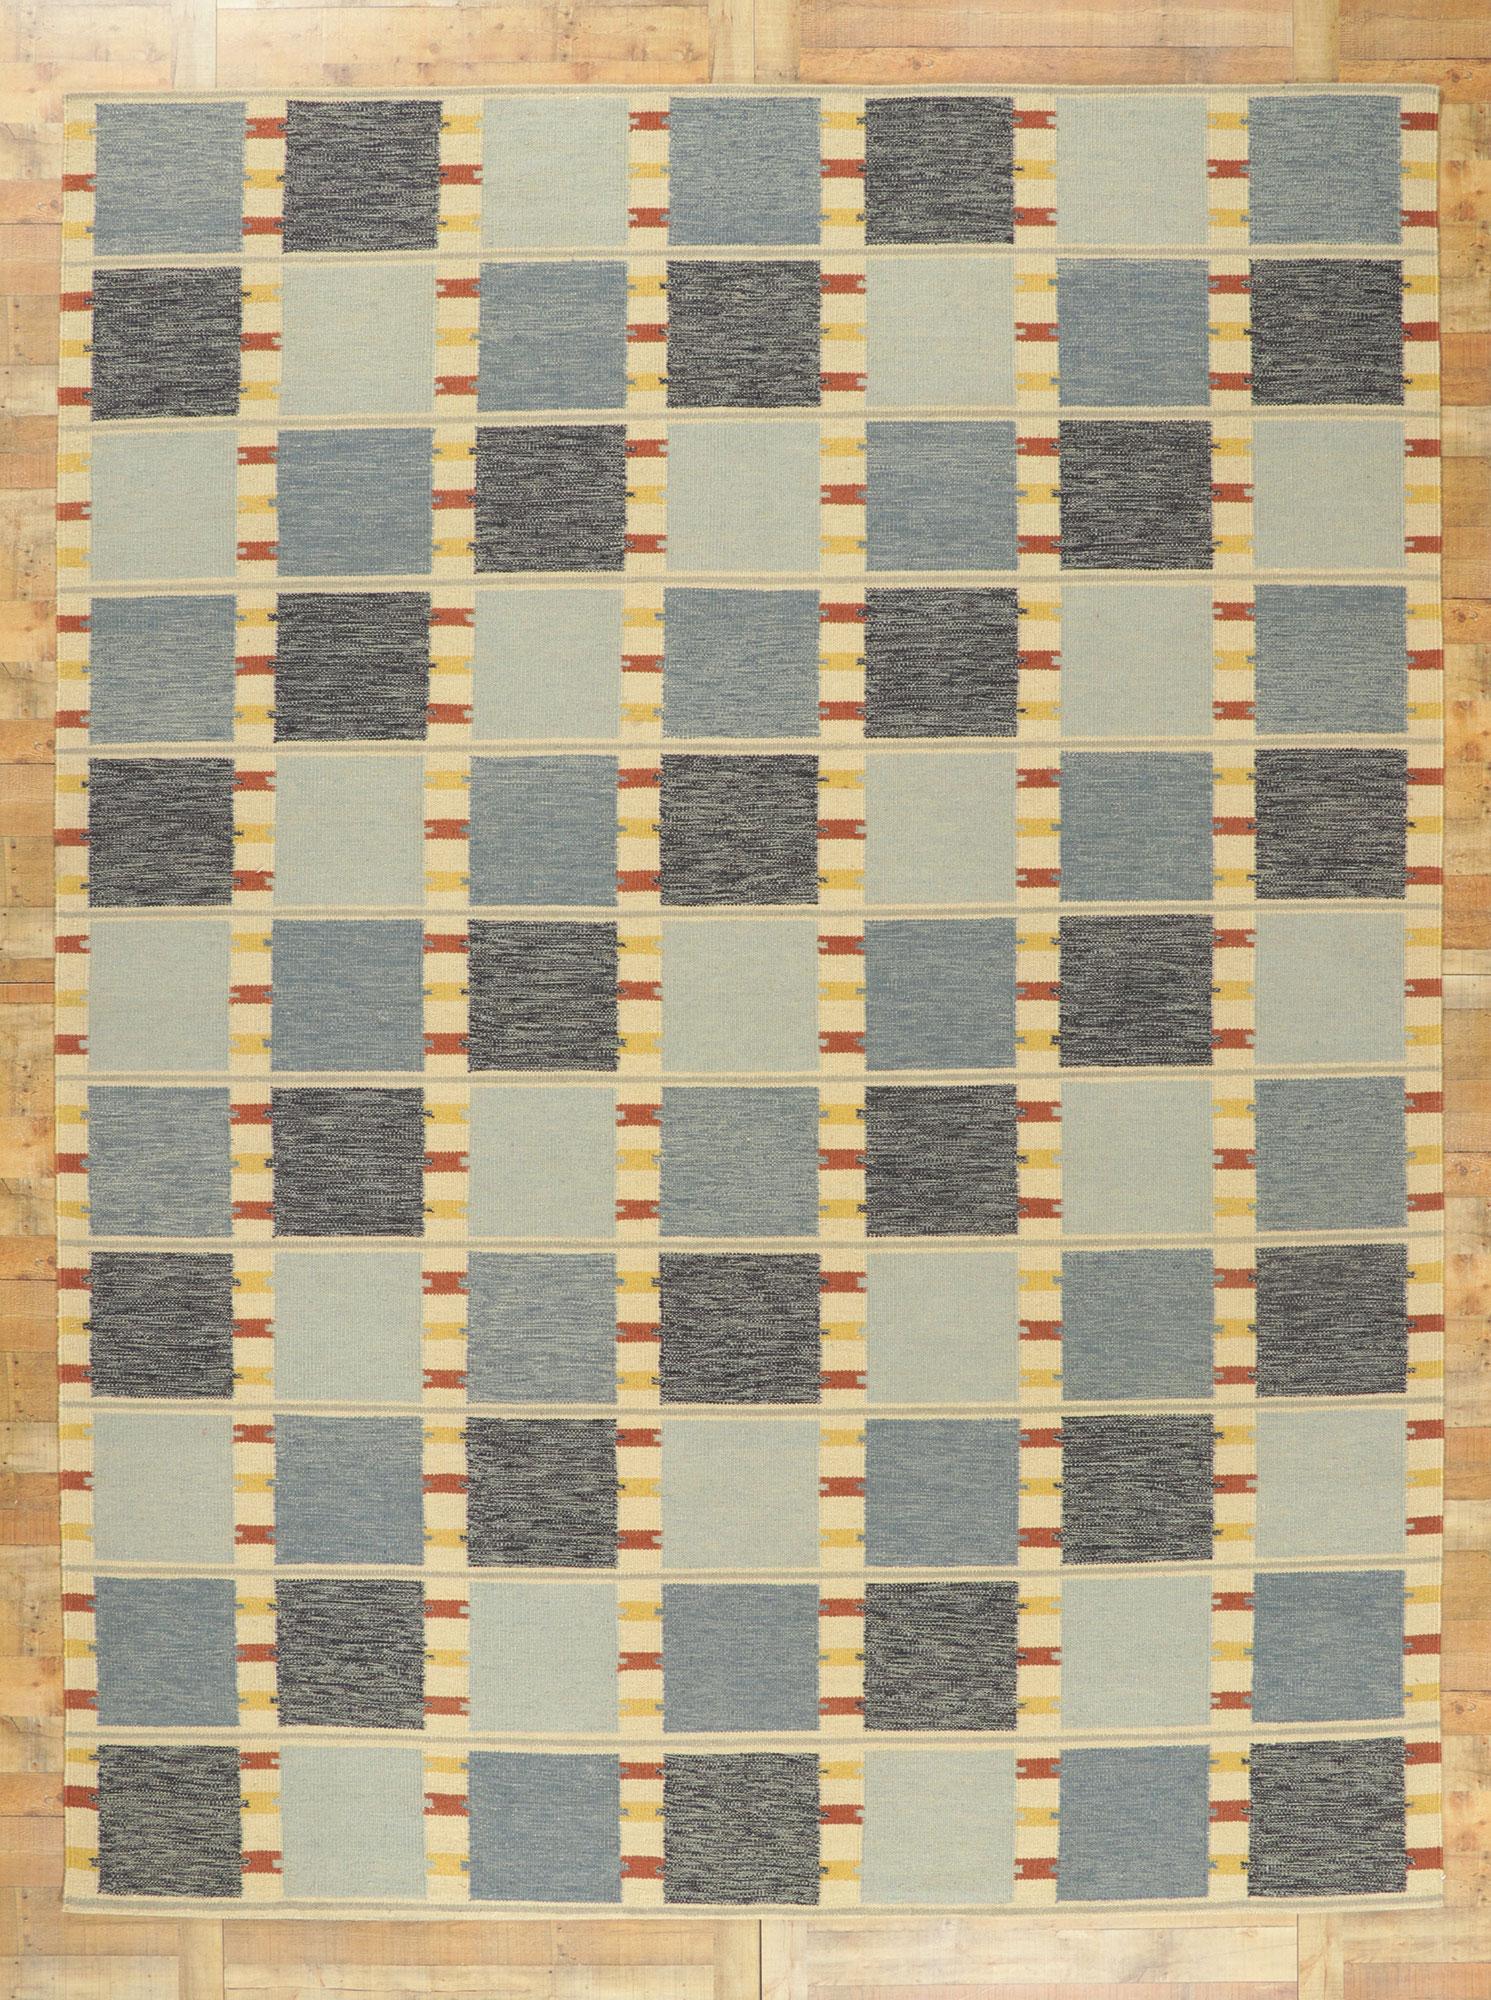 Swedish Inspired Kilim Rug, Scandinavian Modern Meets Earth-Tone Elegance In New Condition For Sale In Dallas, TX